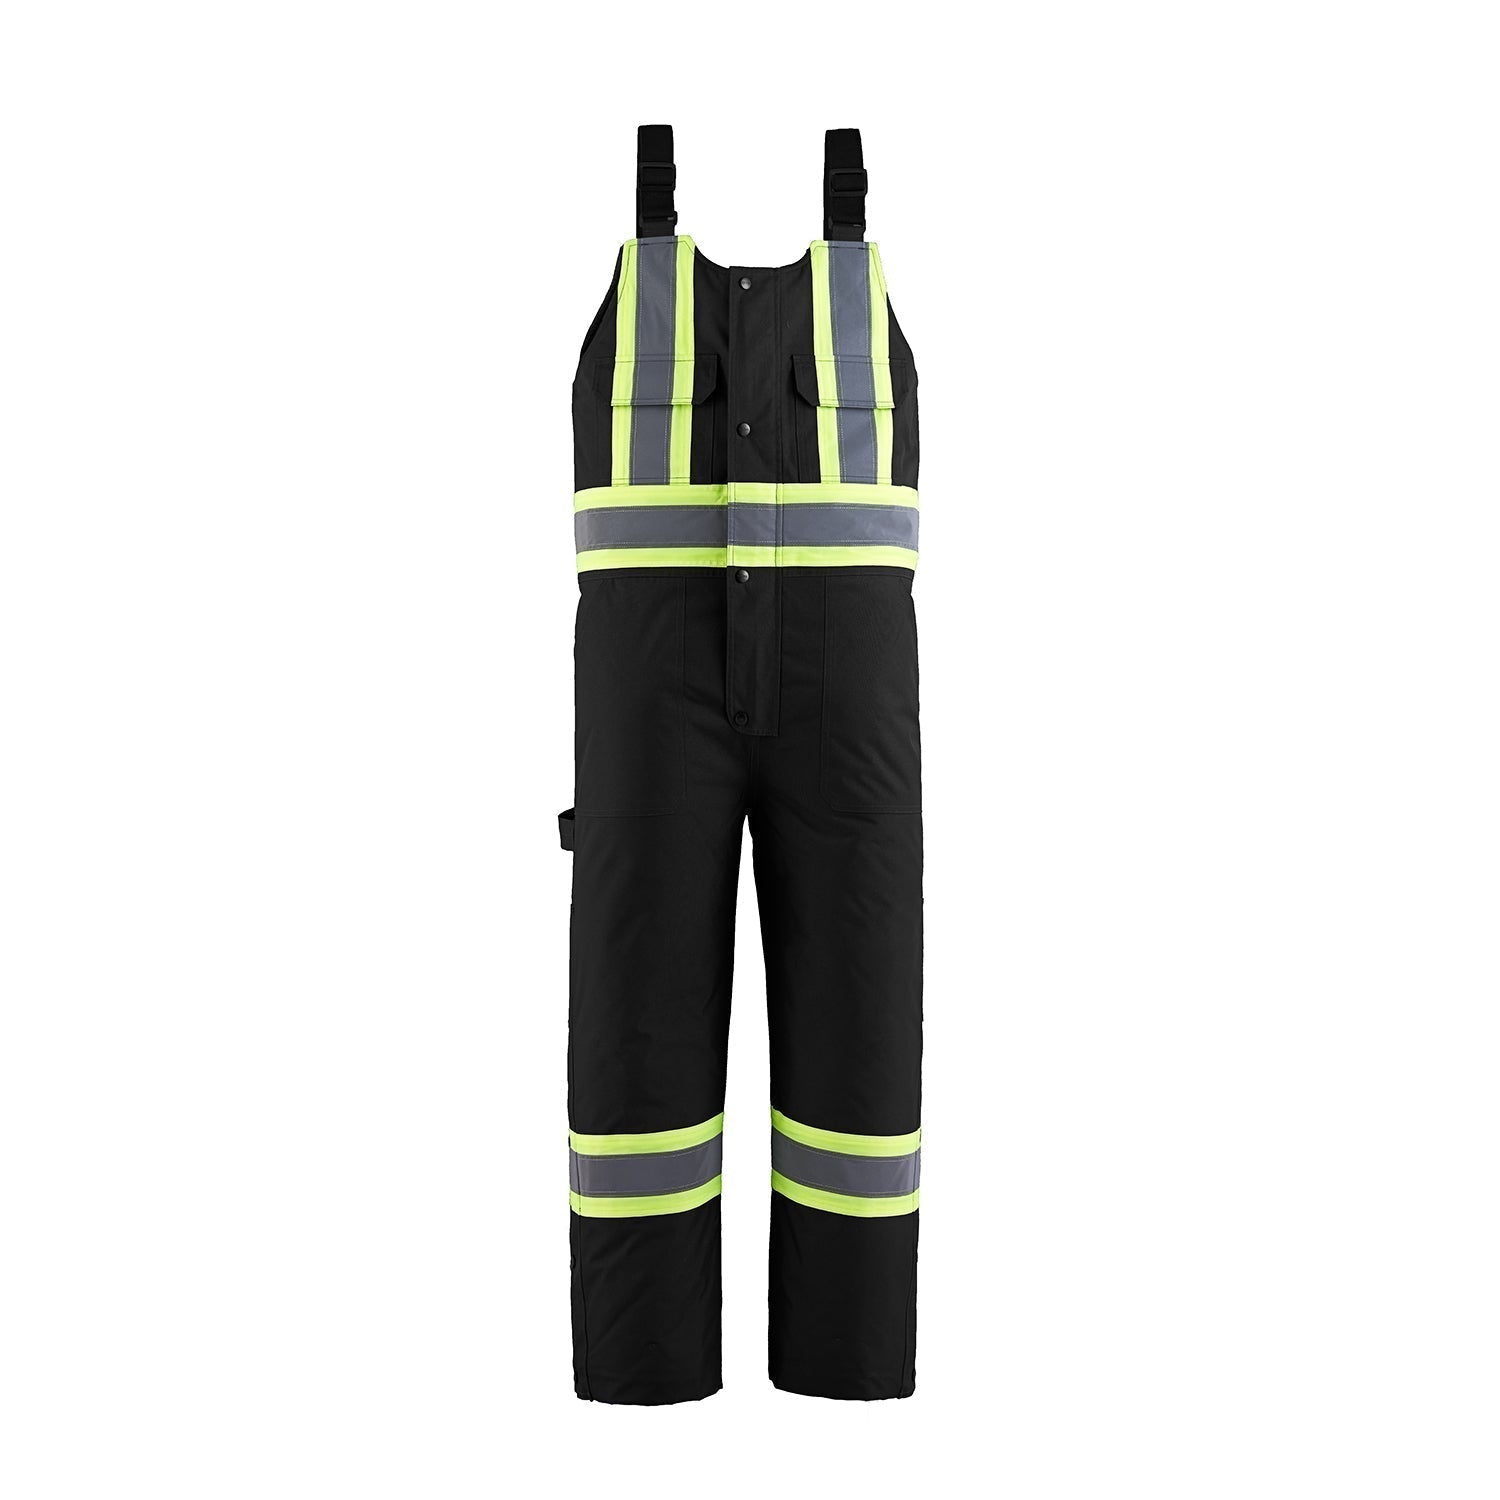 P01255 - Cabover - Men’s Hi-Vis Insulated Overall - Black